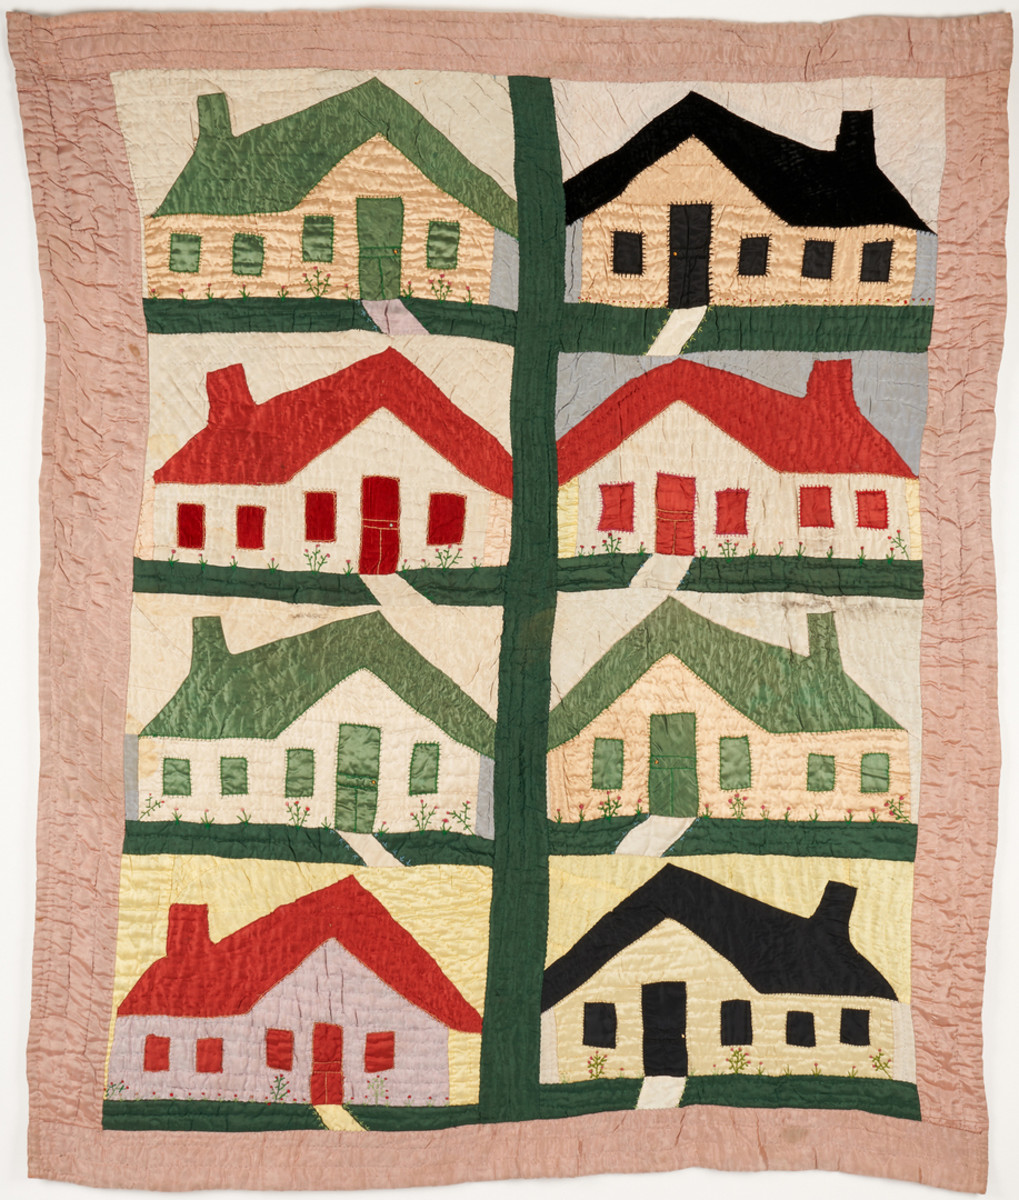 A Southern African-American quilt, attributed to Margaret or Lema Carr of Rogersville, Tennessee, that recently exhibited at Colonial Williamsburg sold for $5,280 - more than double its pre-sale estimate of $2,000-$2,400.